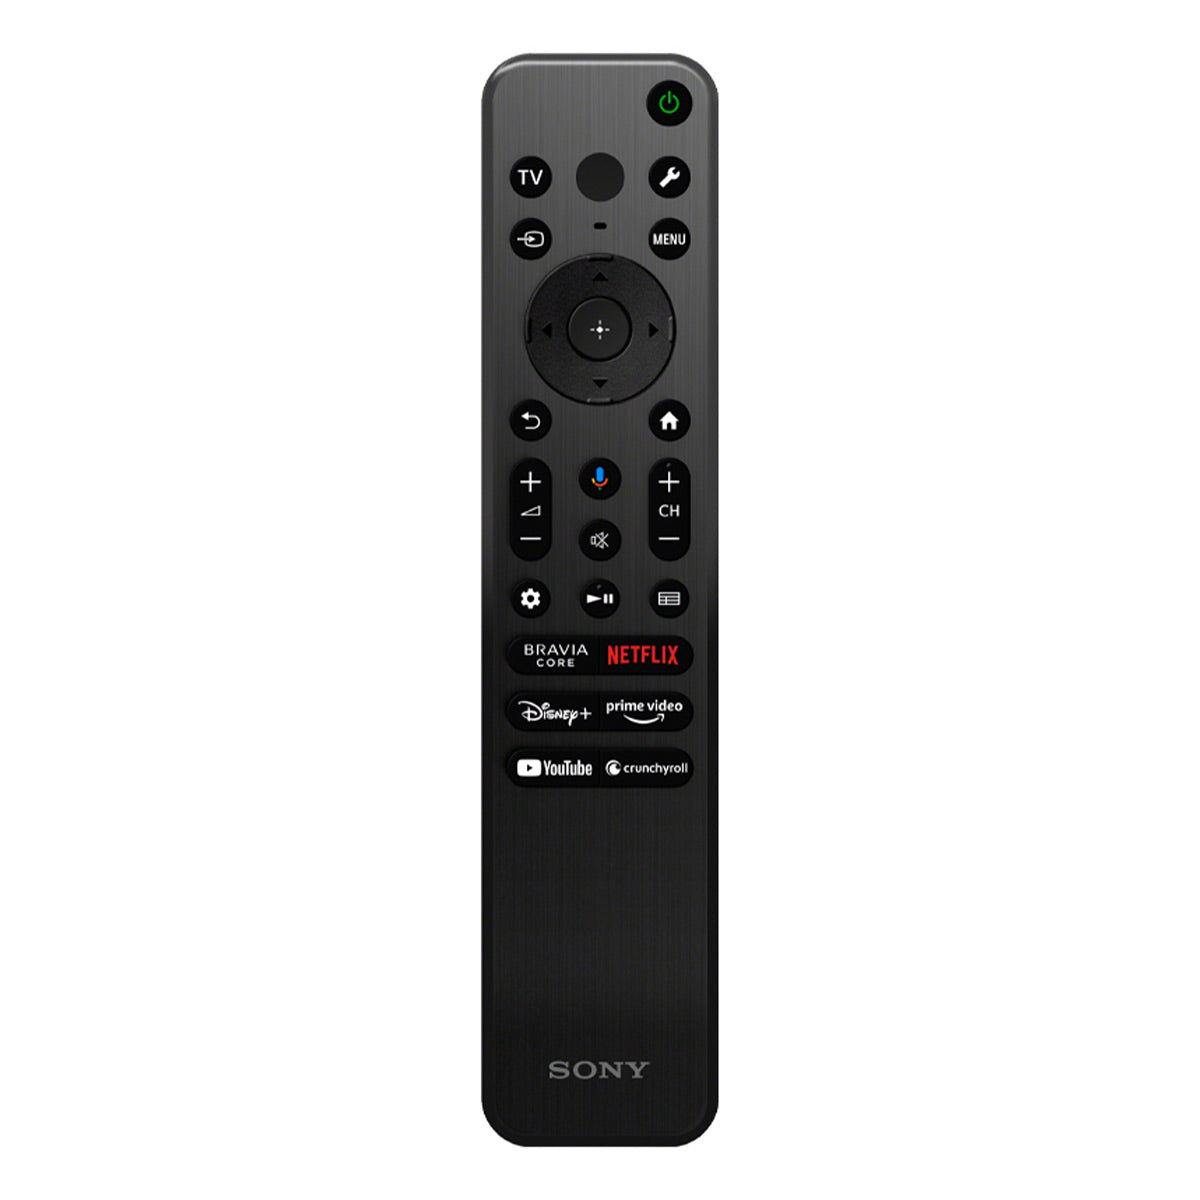 Sony XR55A80L BRAVIA XR 55" Class A80L OLED 4K HDR Google TV (2023) with STR-AZ1000ES 7.2 Channel 8K Home Theater AV Receiver